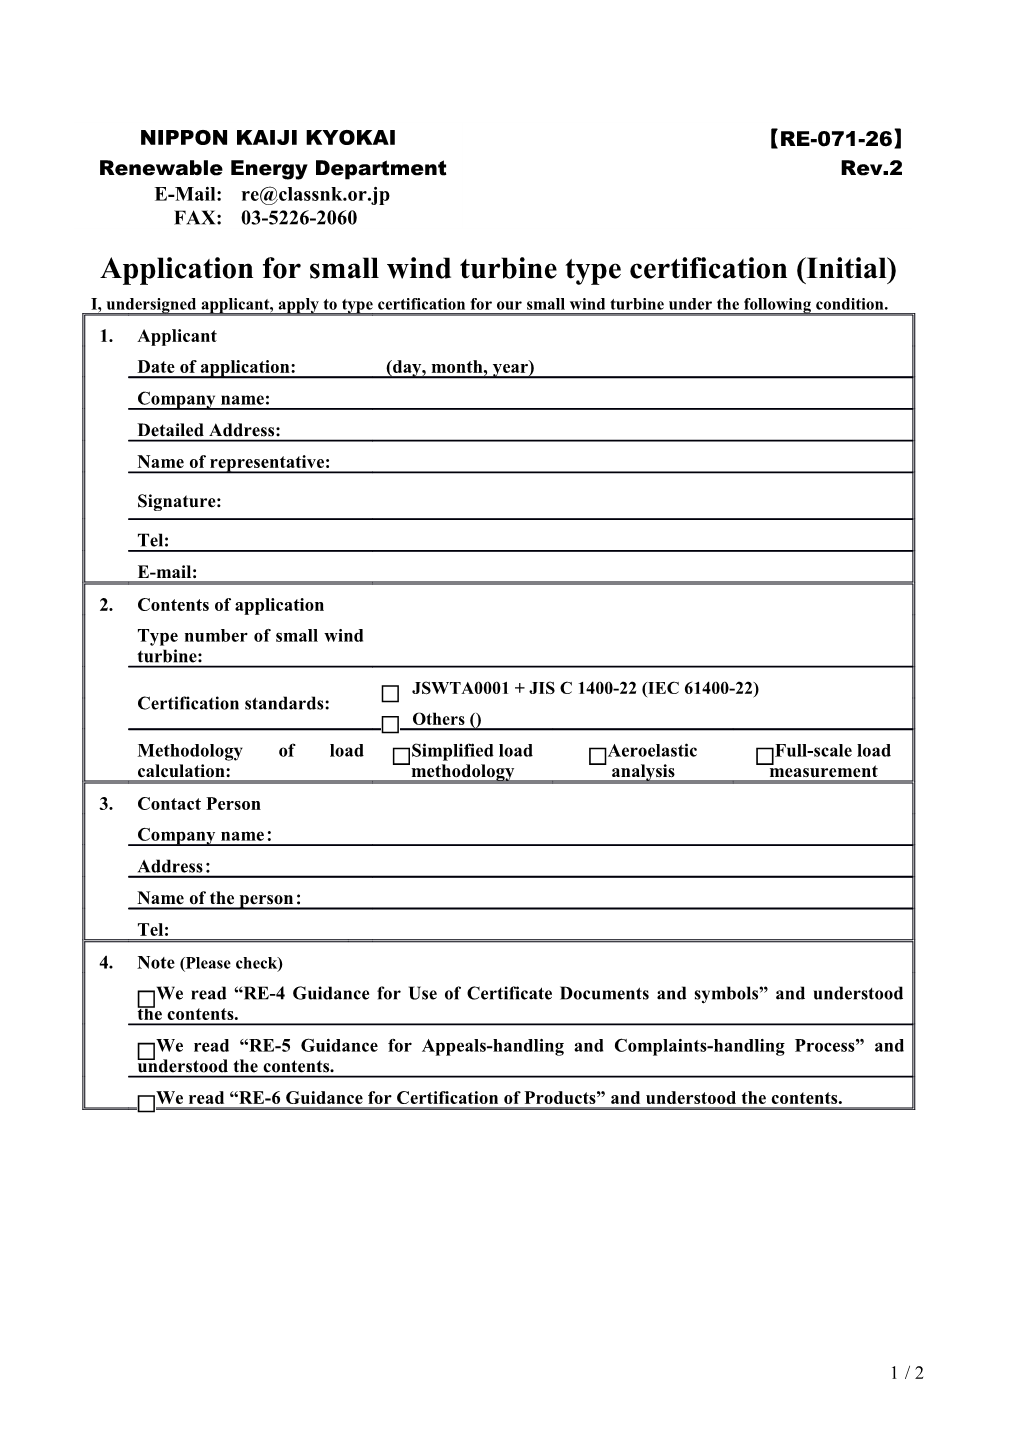 Application for Small Wind Turbine Type Certification (Initial)